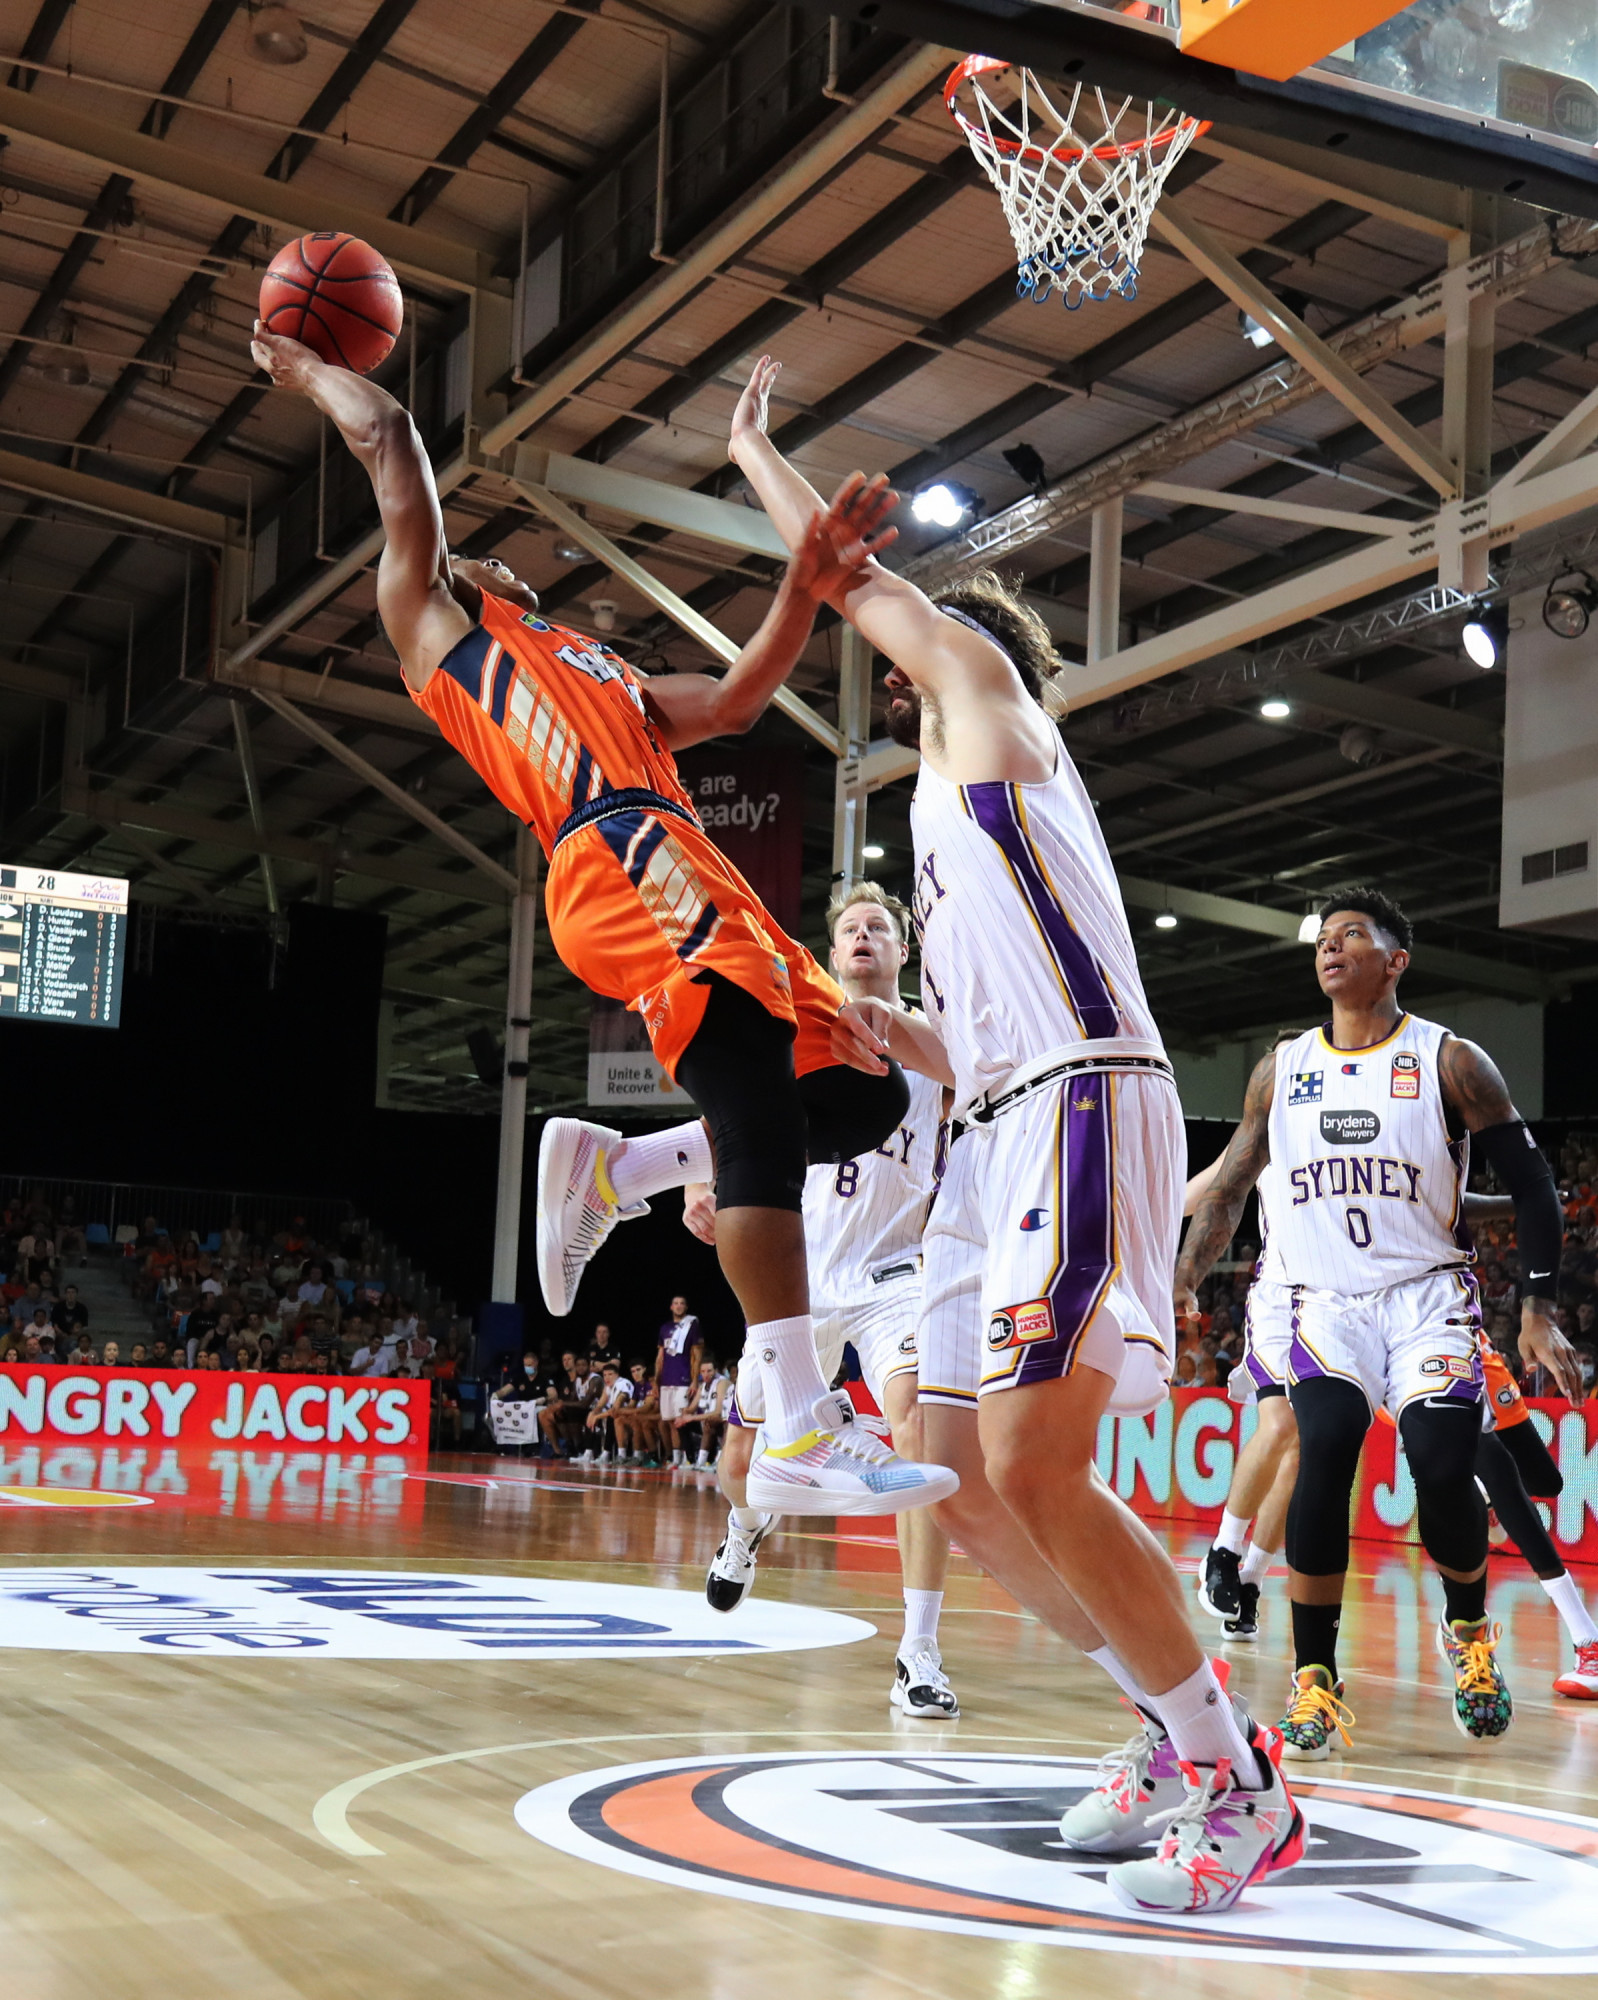 Cameron Spacecam Oliver goes hard to the basket Photo Credit: Gordon Greaves/Cairns Taipans